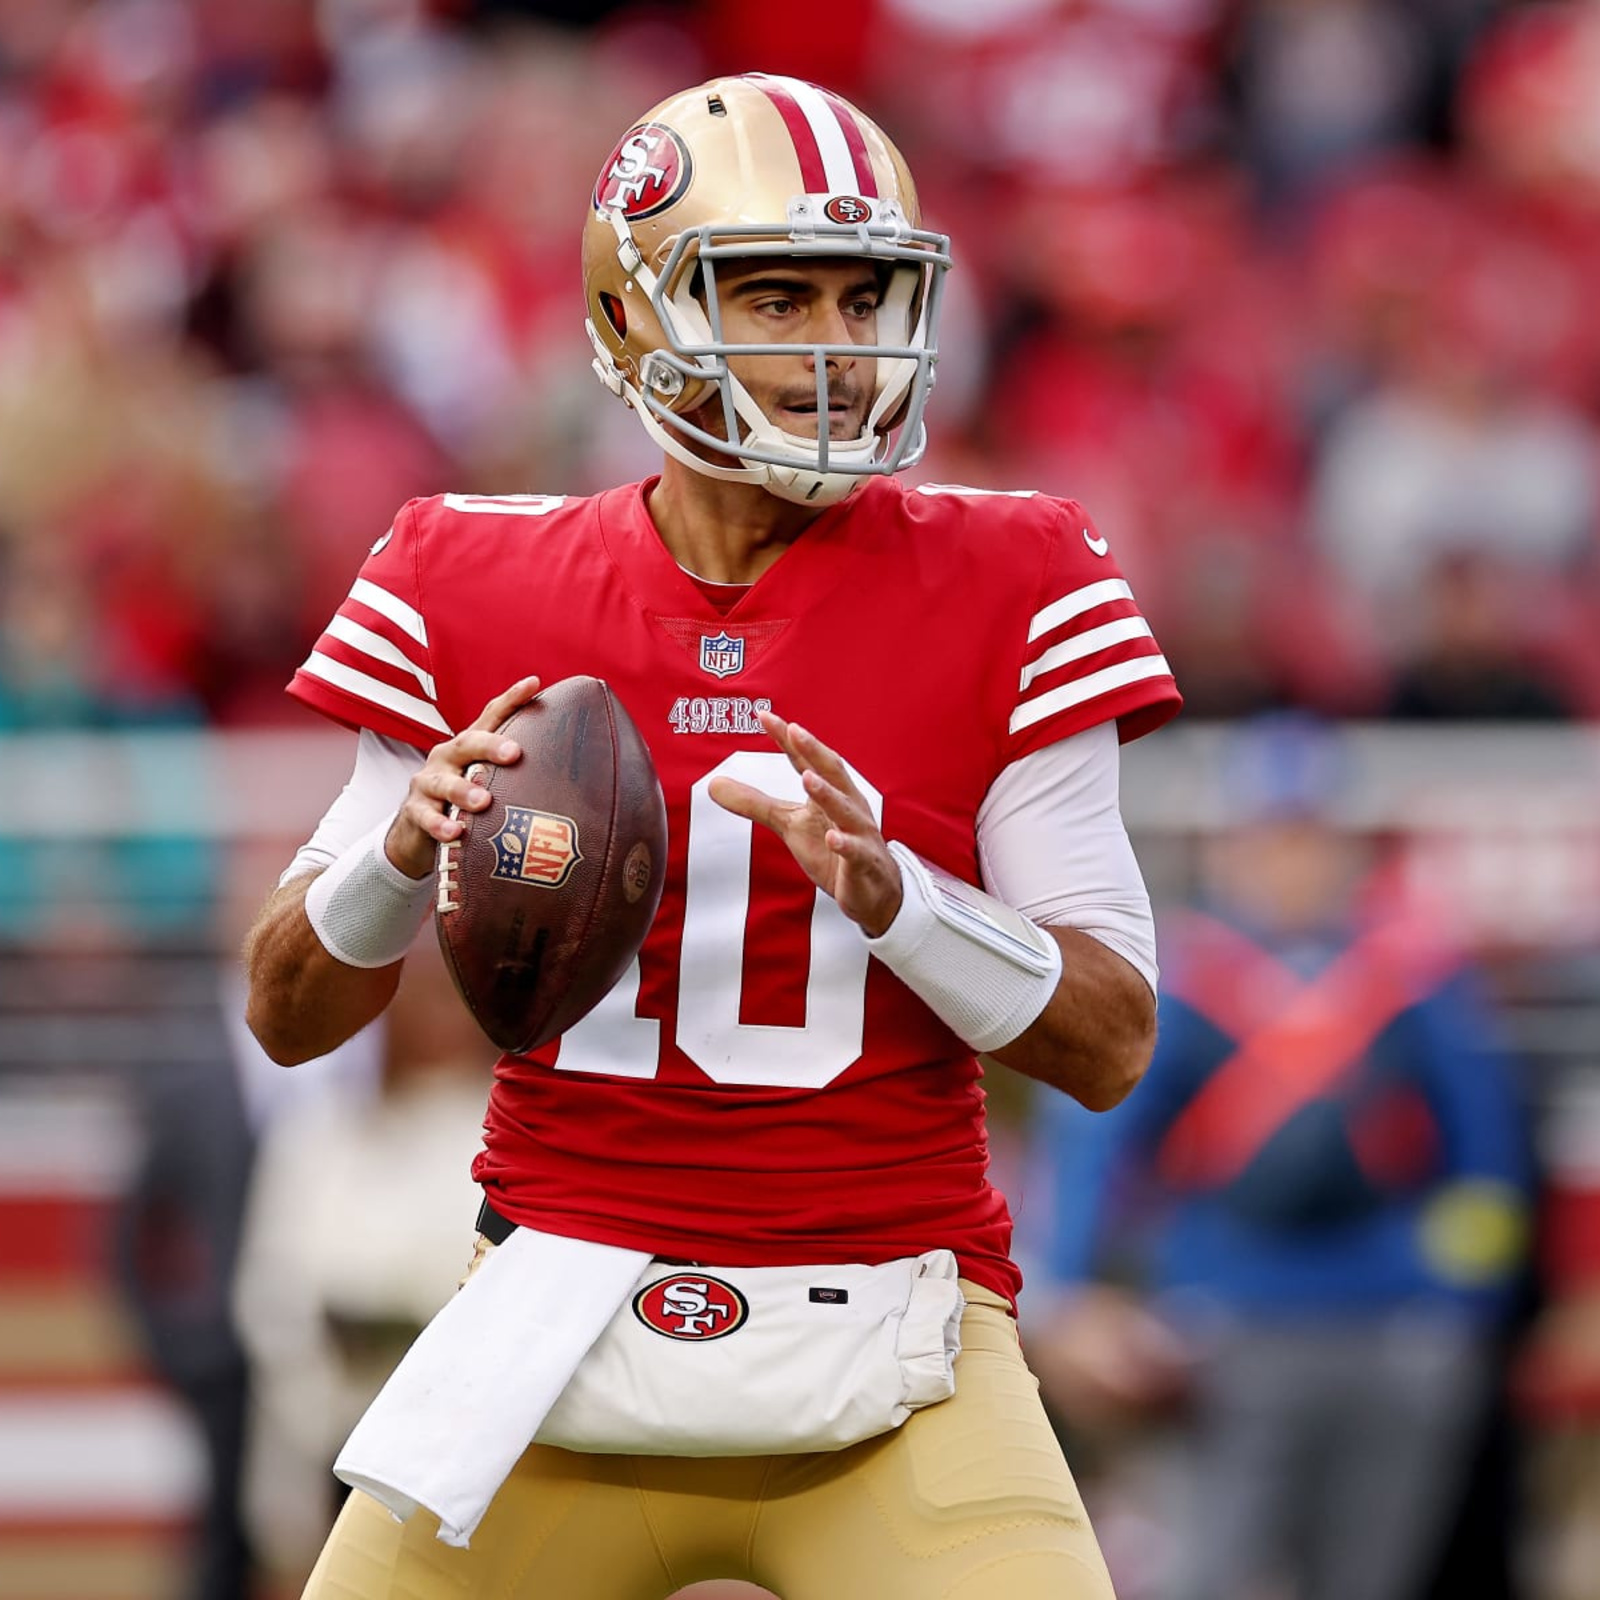 Jimmy Garoppolo, whom Browns coveted in offseason, traded to 49ers